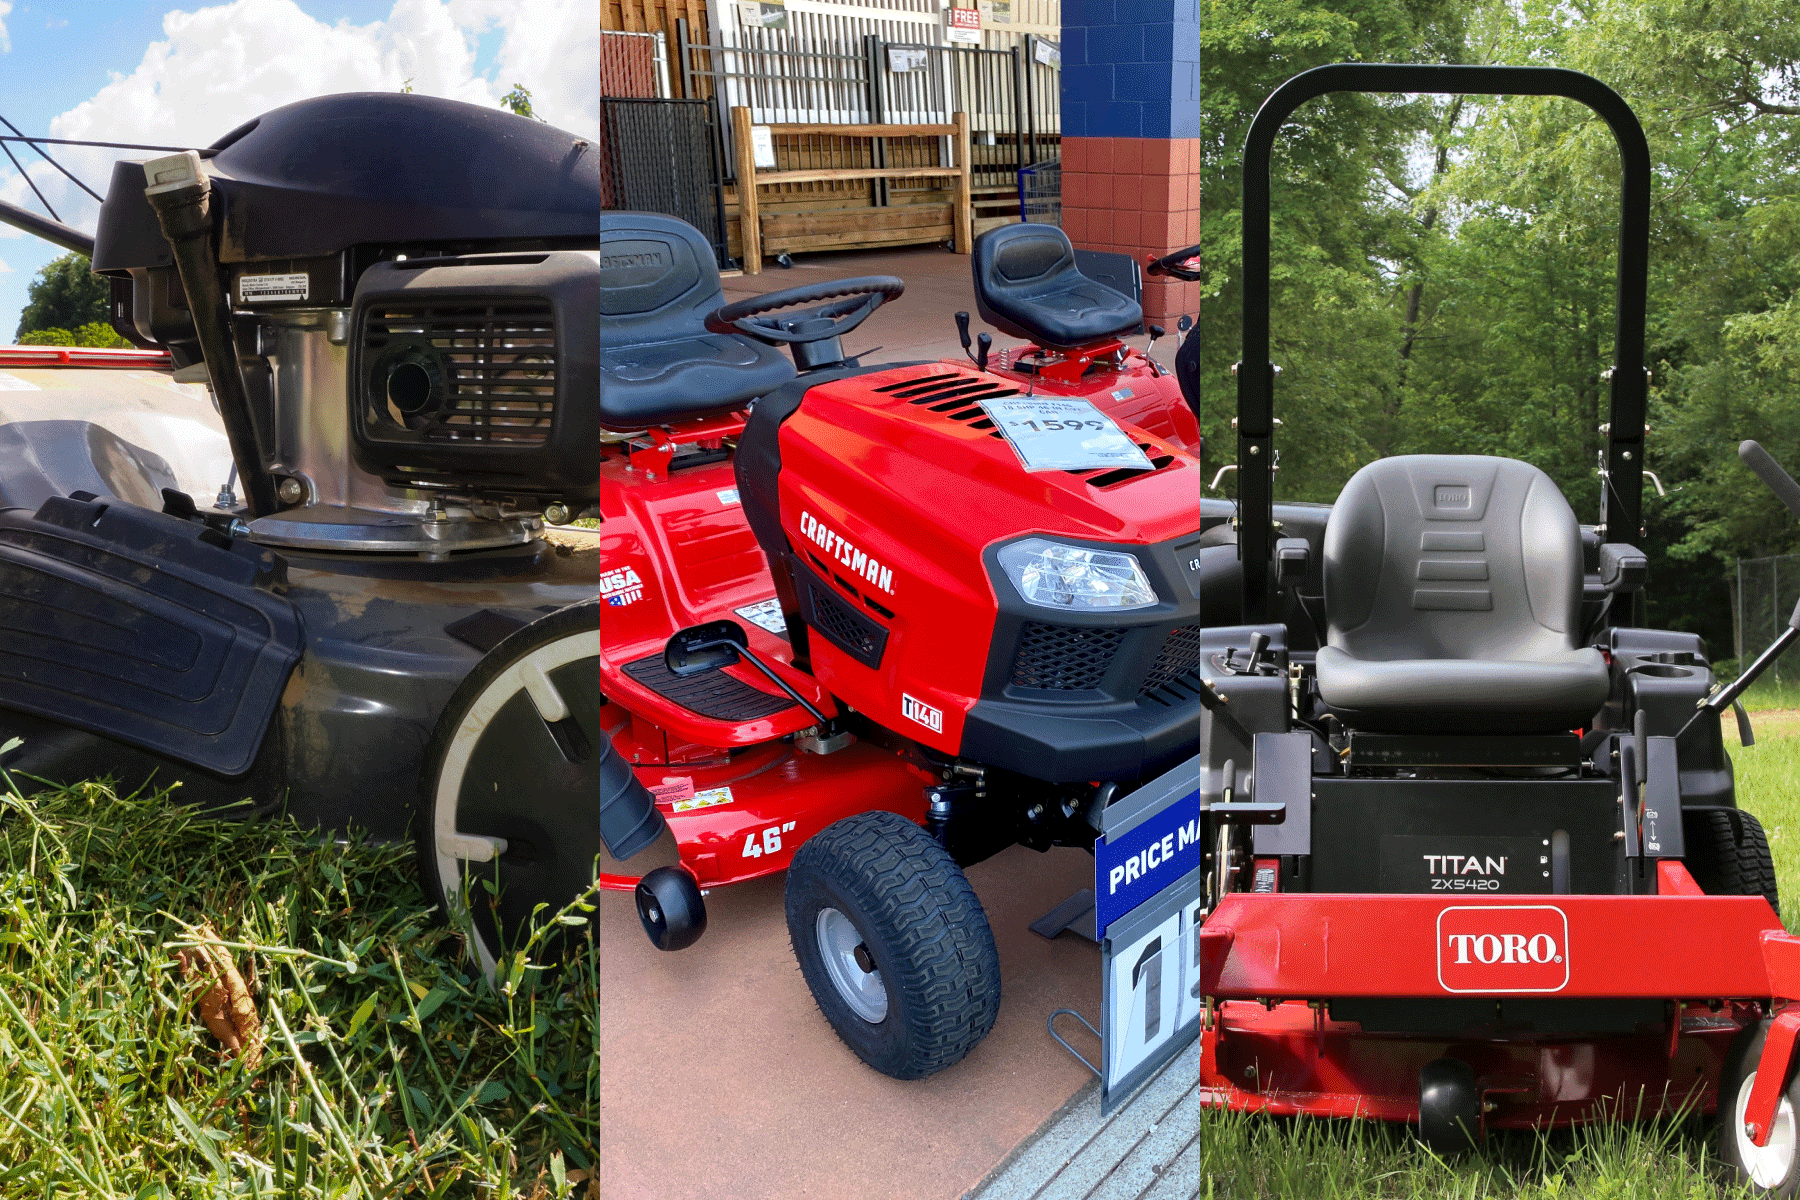 Collaged photo of a Honda, Toro and Craftsman lawn mower